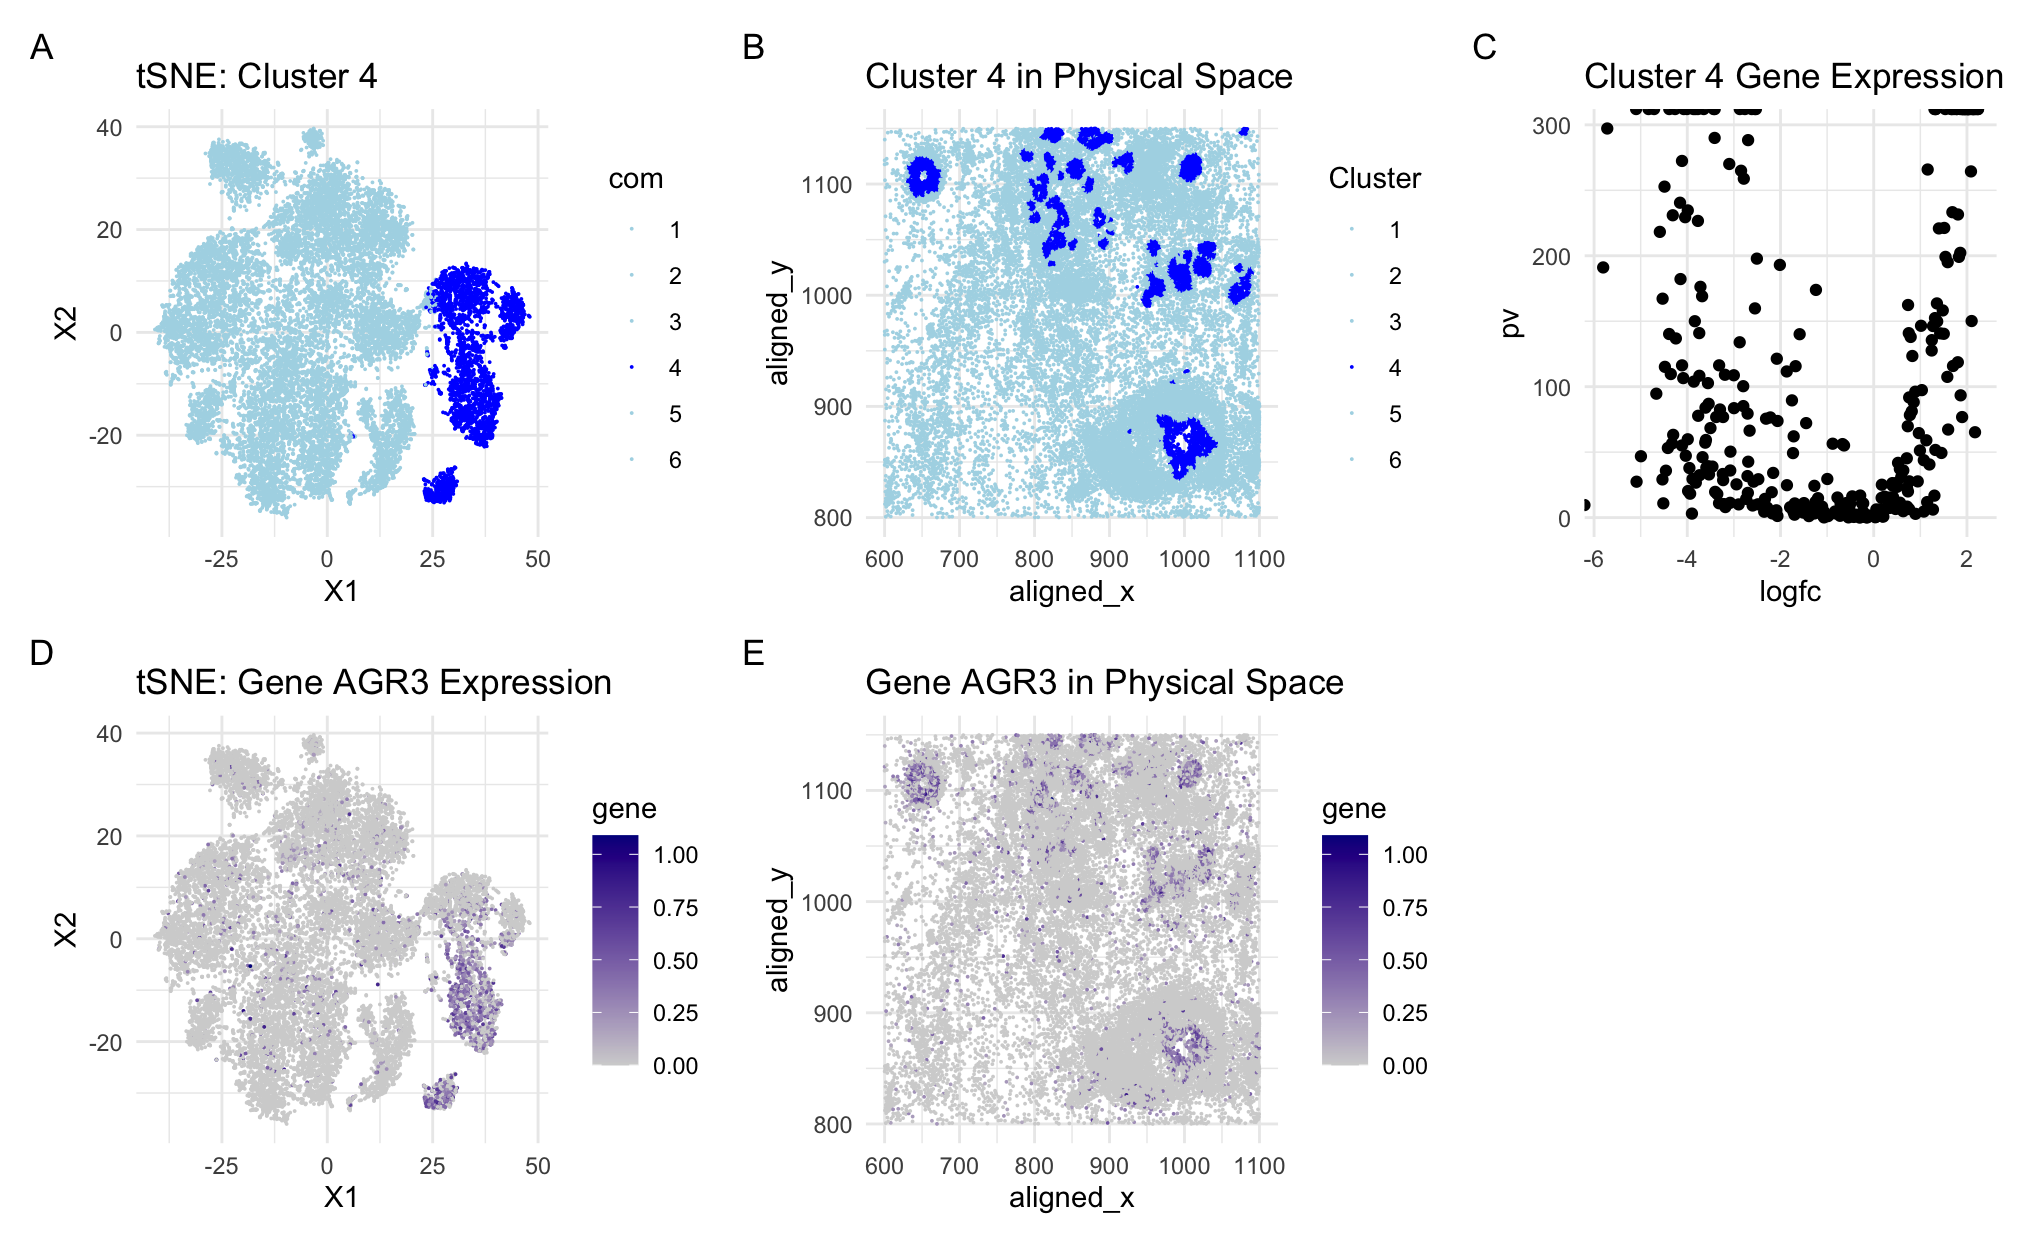 Analysis of AGR3 Cluster and Gene Expression